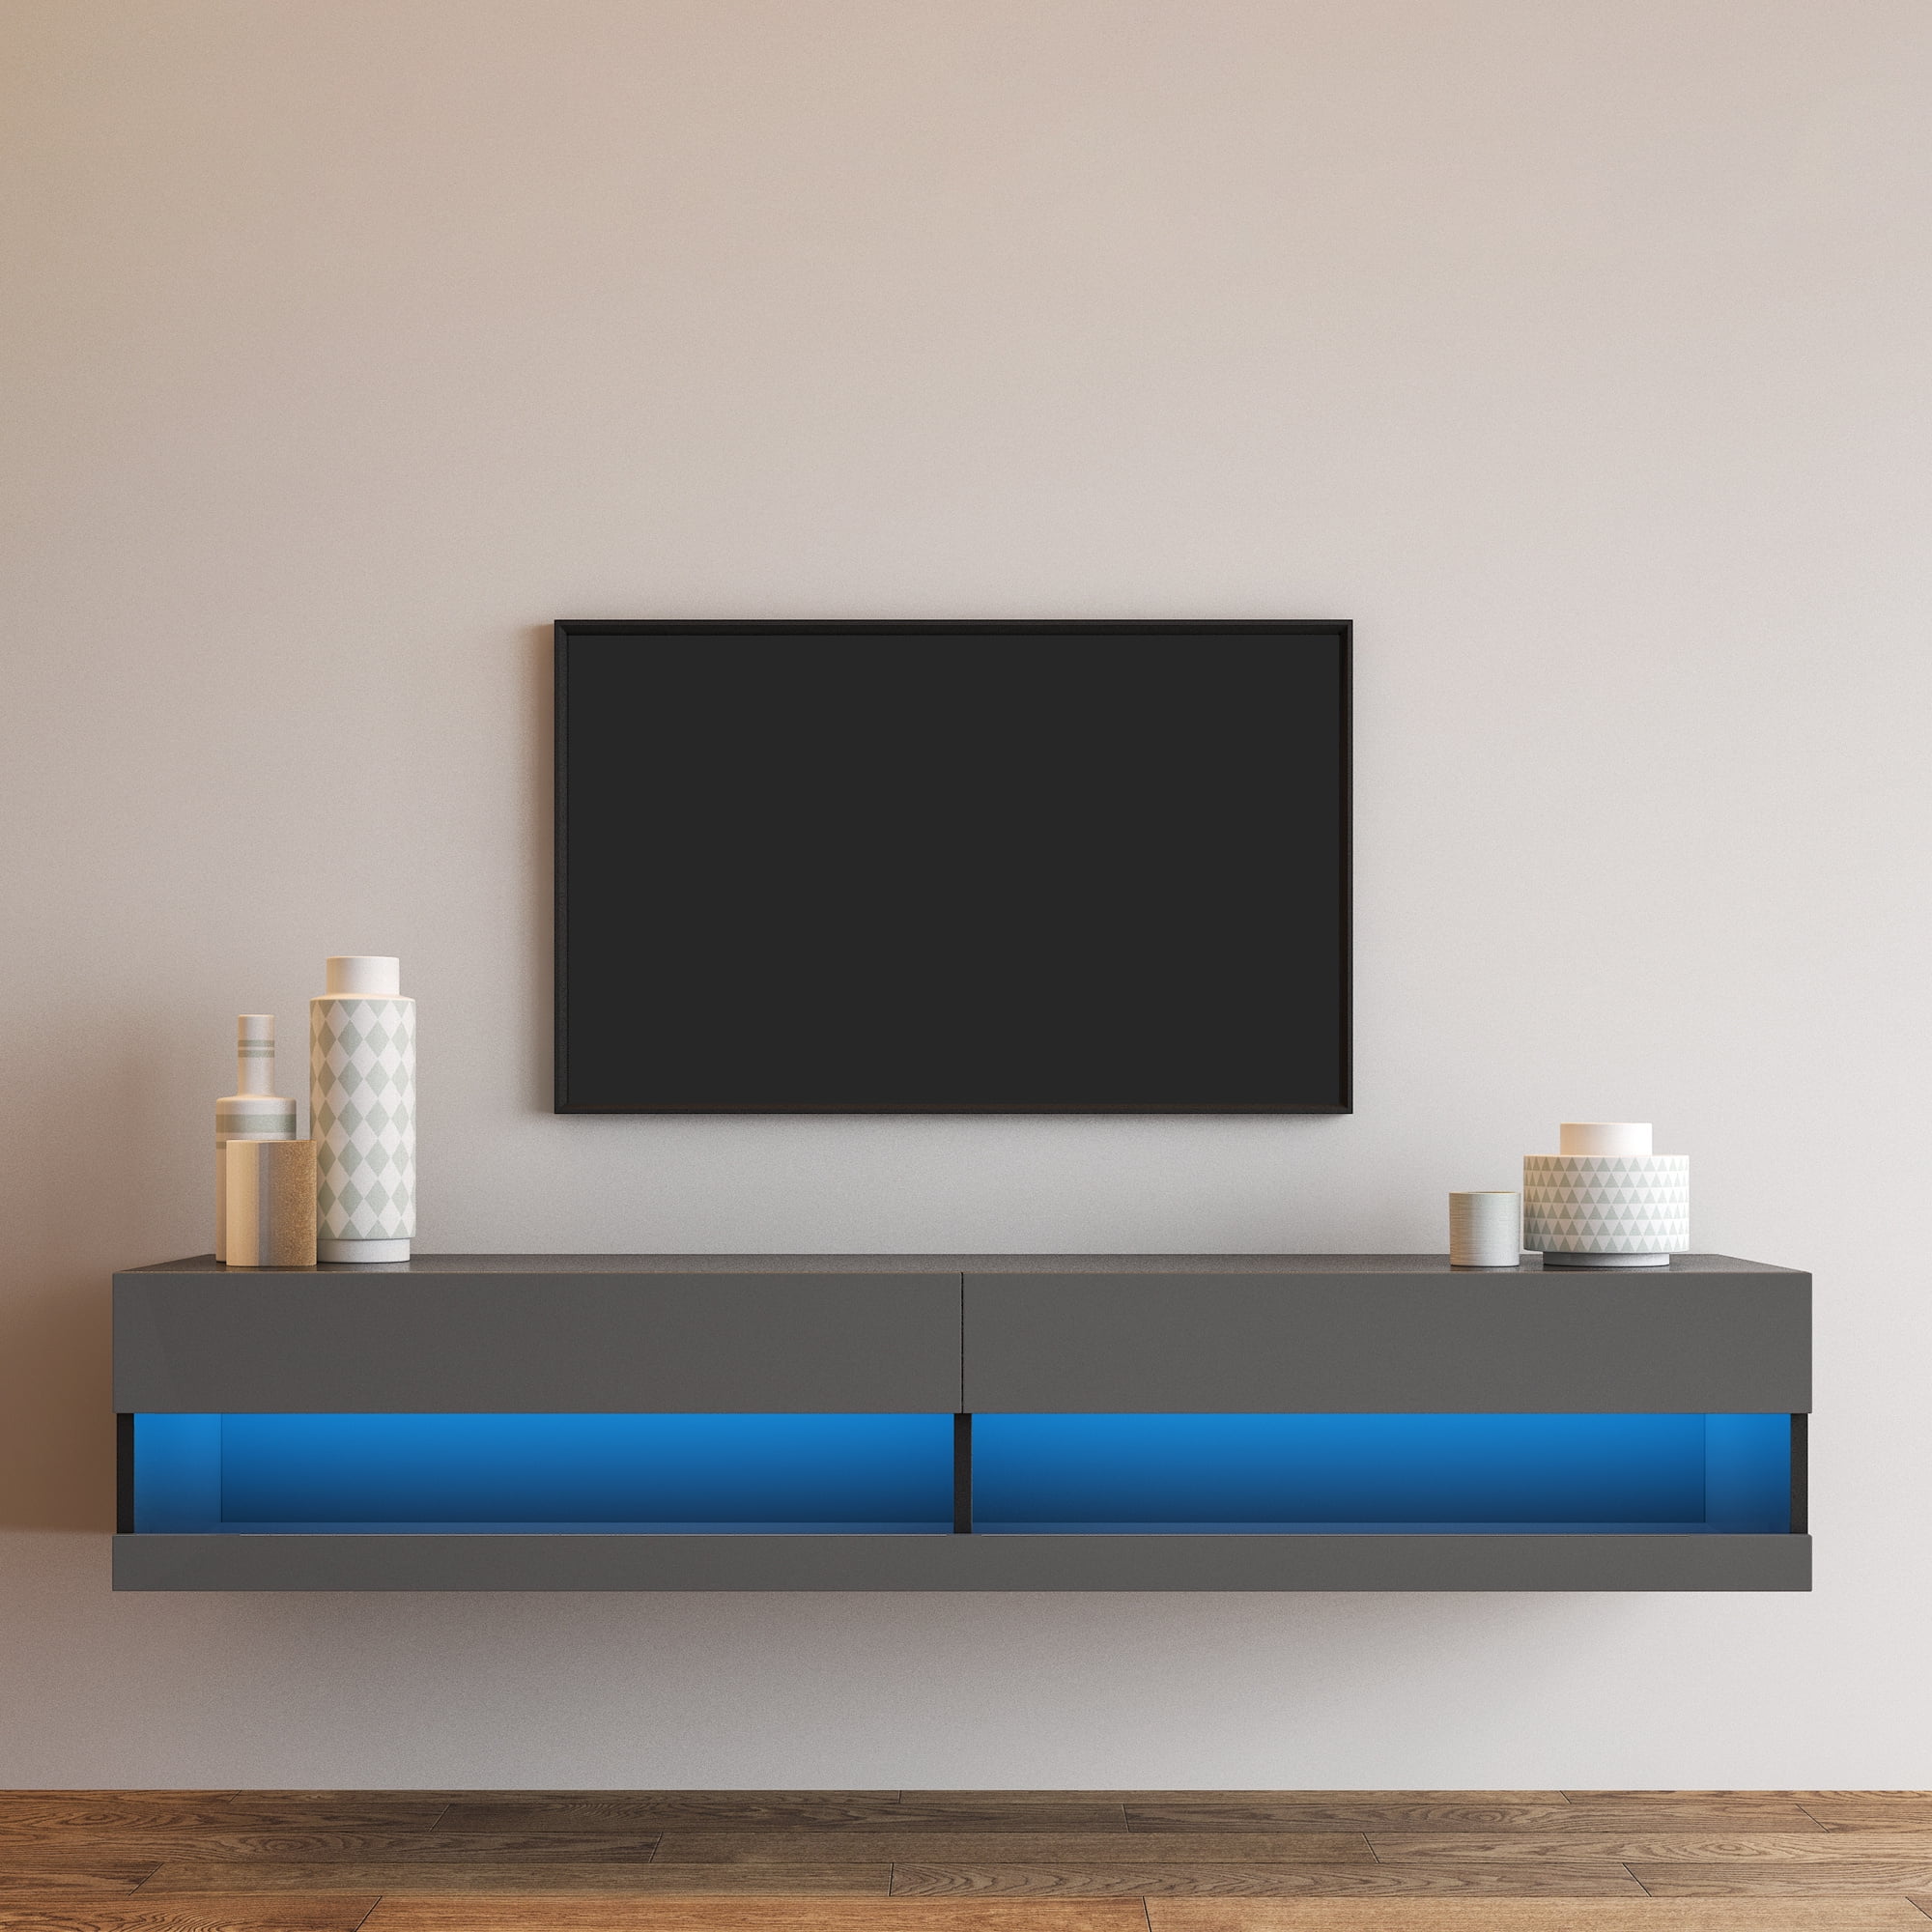 Details about   Wall Floating Mounted Wooden TV Entertainment Center Shelf Media Storage Black 